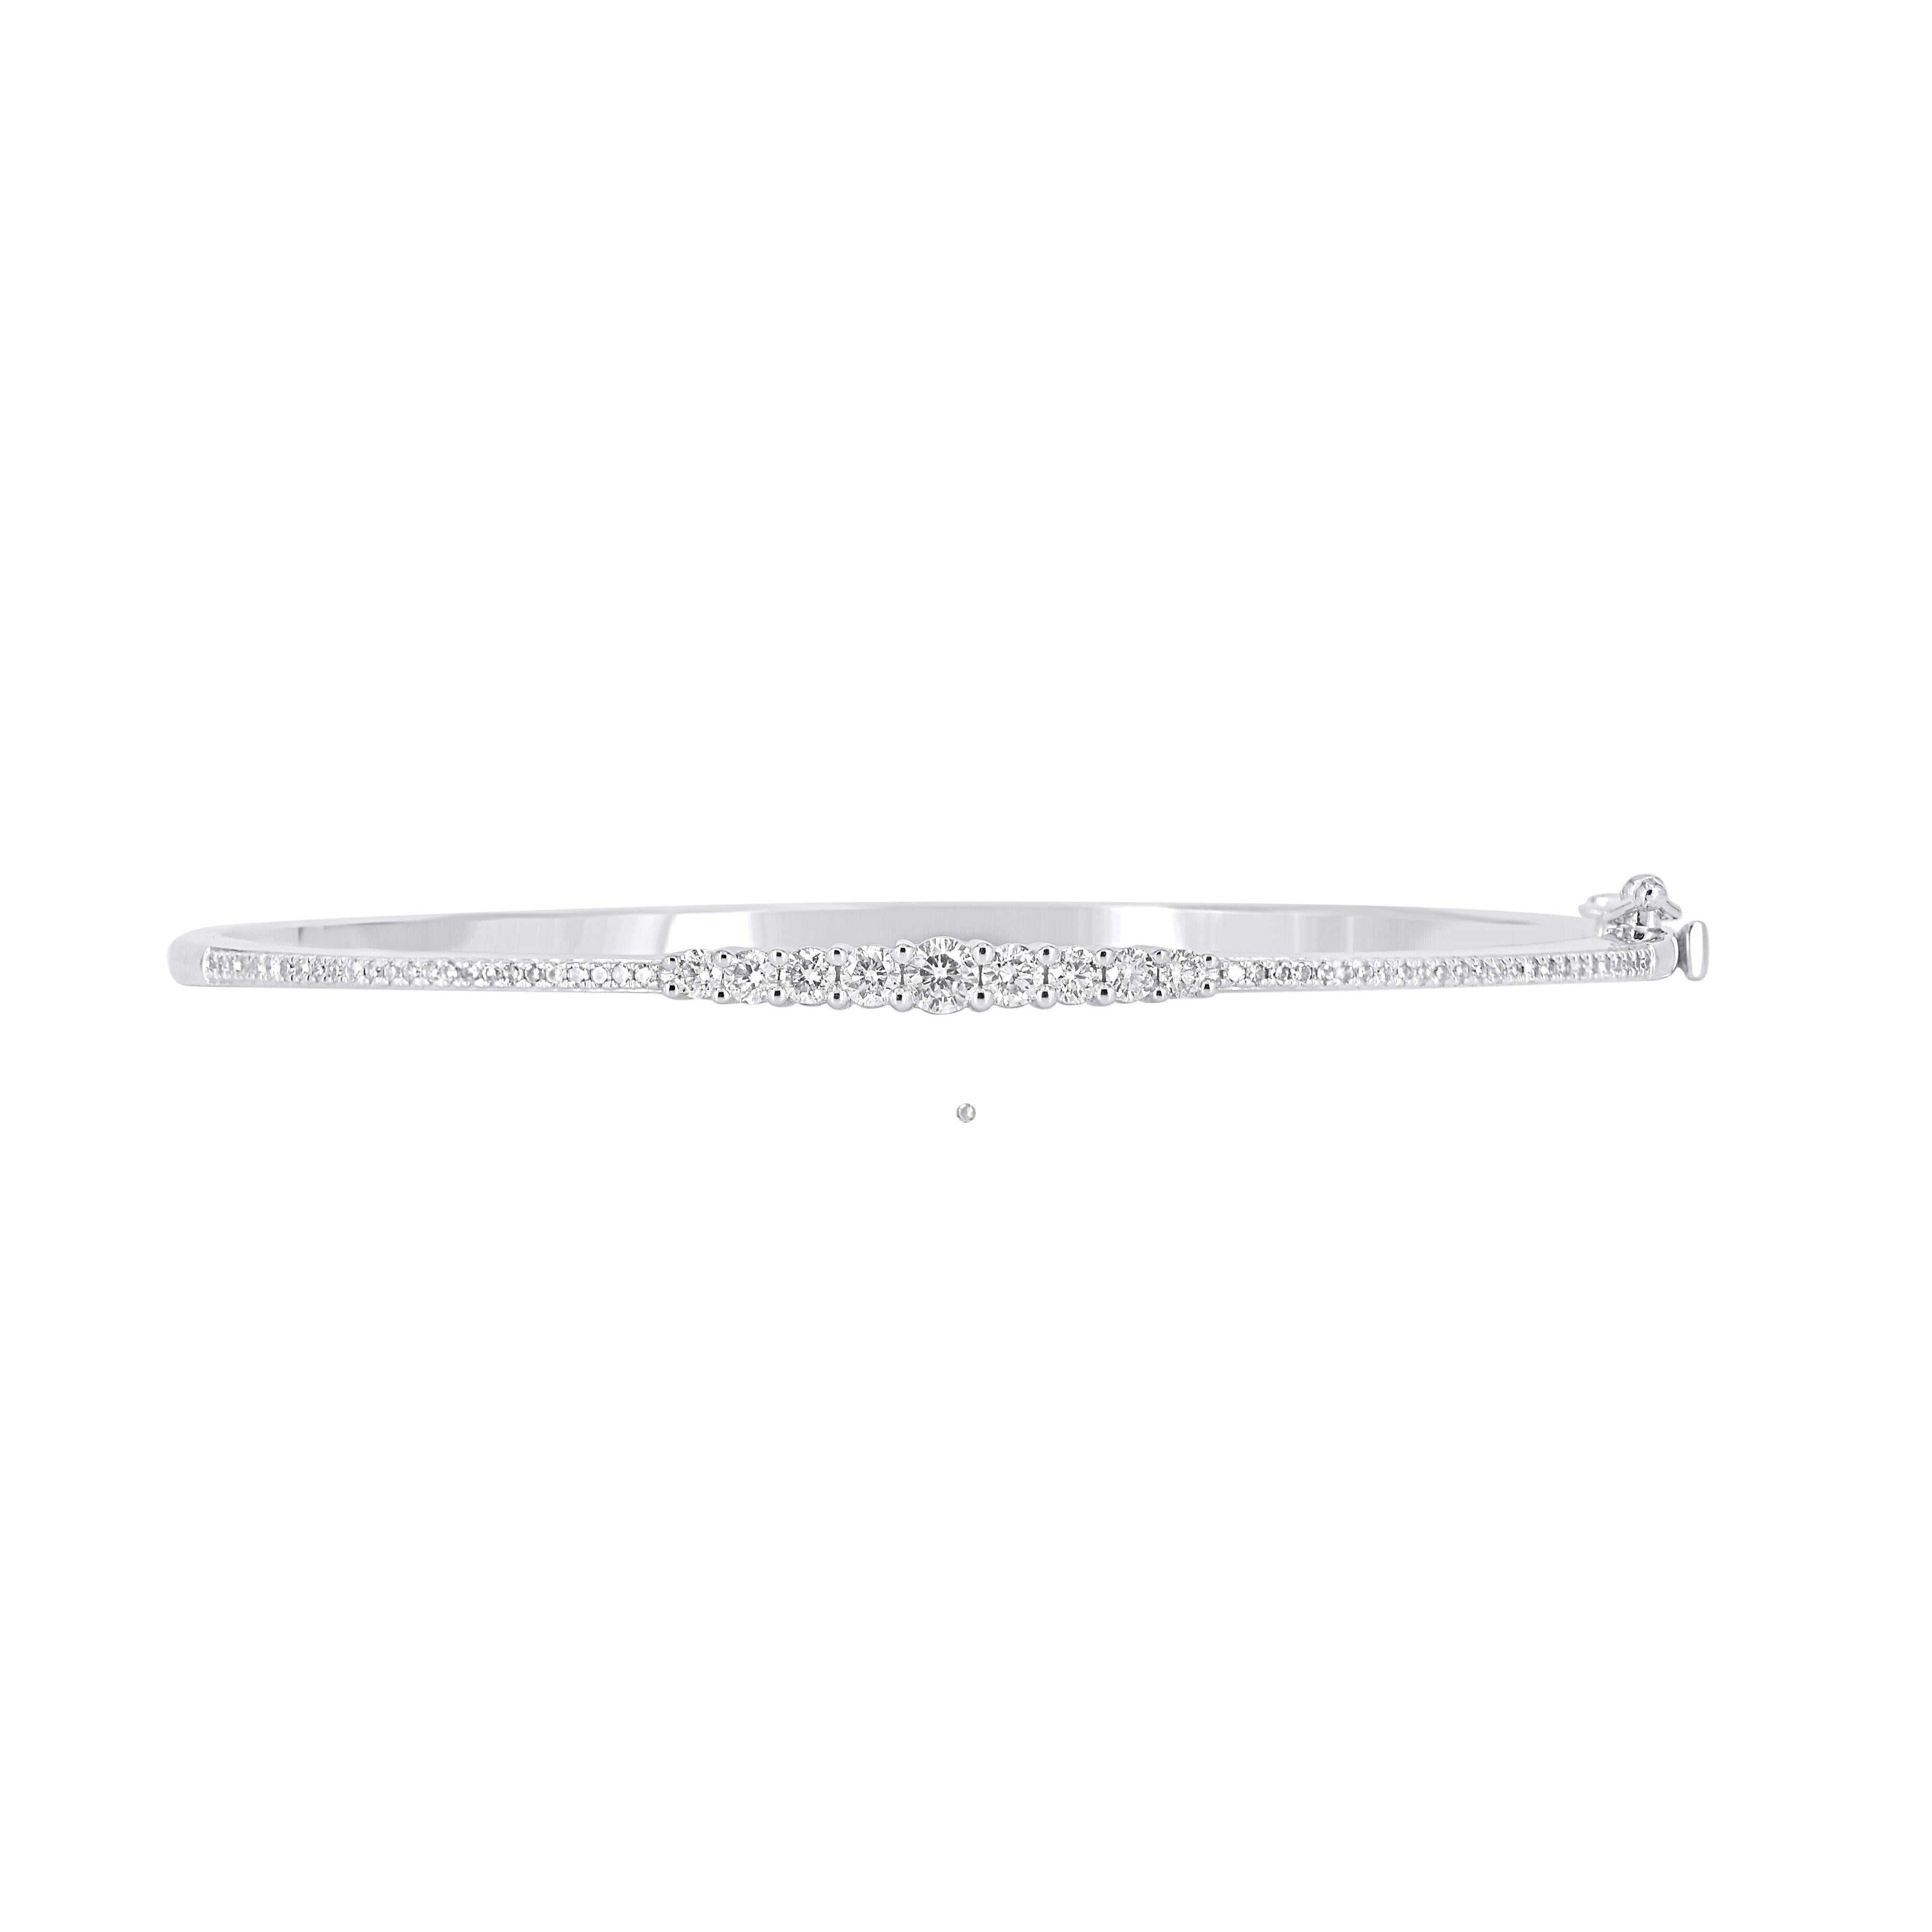 Classic and sophisticated, this diamond bangle bracelet pairs well with any attire.
This Shimmering bangle bracelet features 61 natural round single cut & Brilliant cut diamonds in prong setting and crafted in 14kt white gold. Diamonds are graded